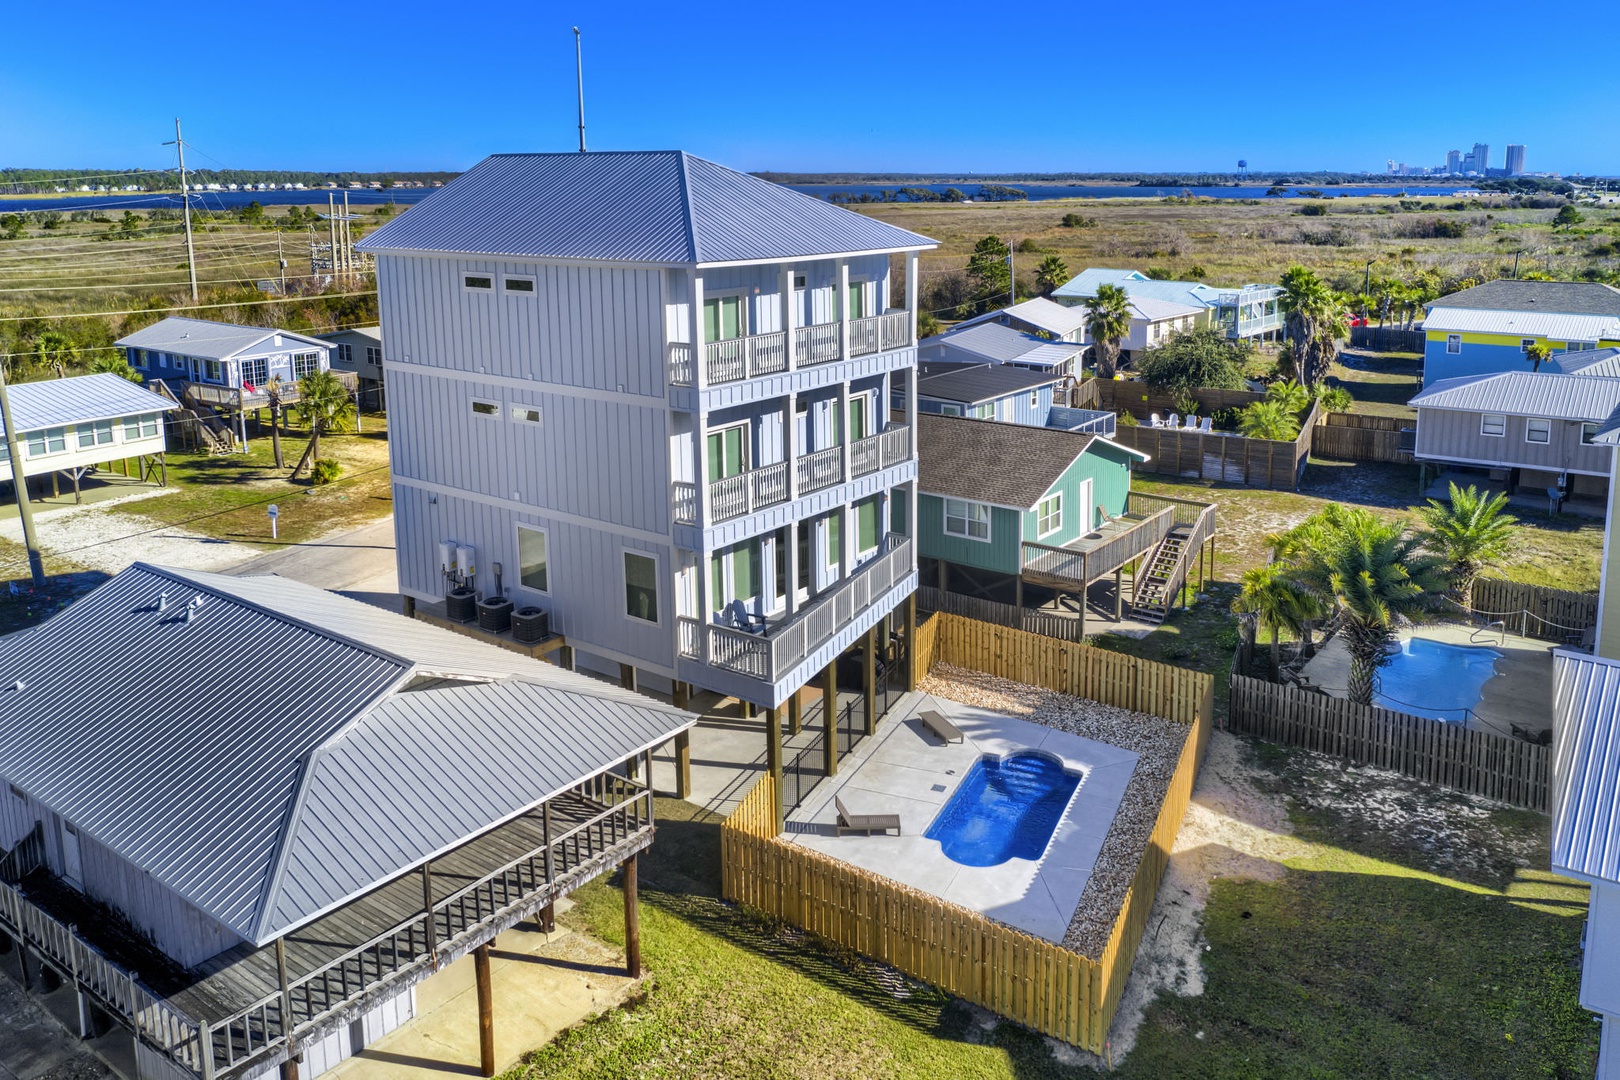 Just a 5-minute stroll from the beach, this 3879 sq ft house with 8 bedrooms and a private pool promises endless fun and unforgettable beachside adventures!